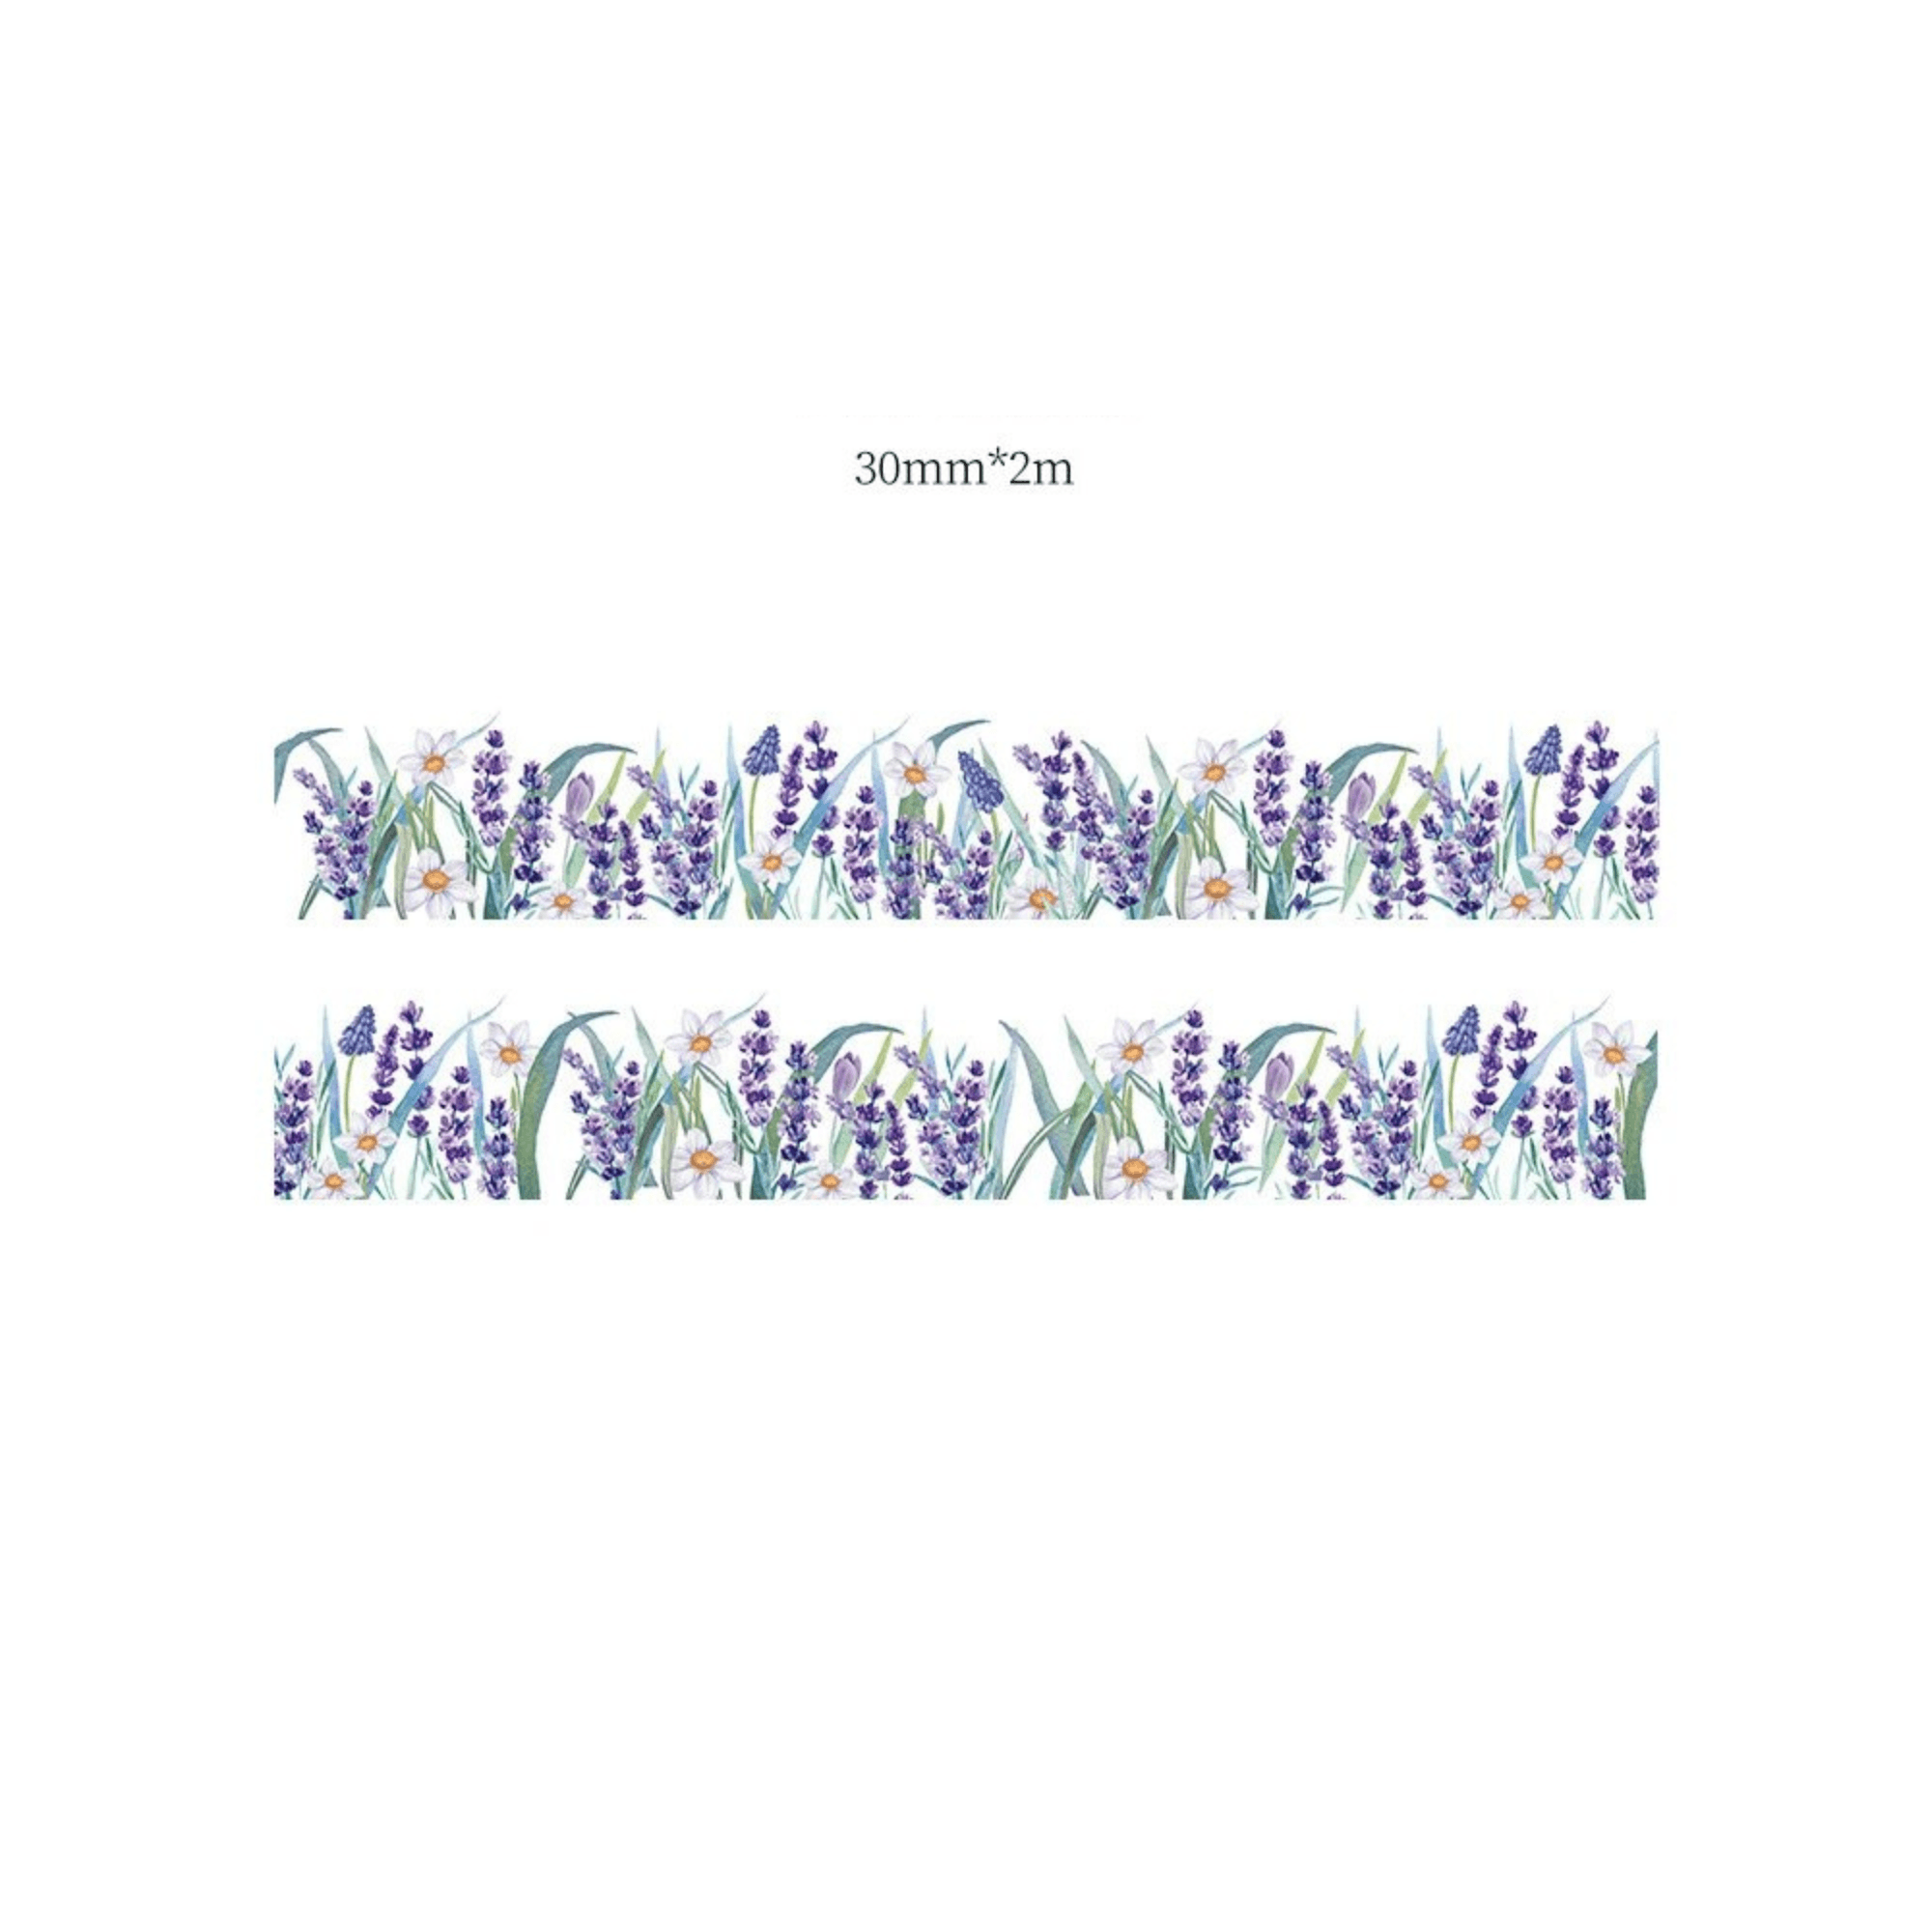 Washi Tape Letters